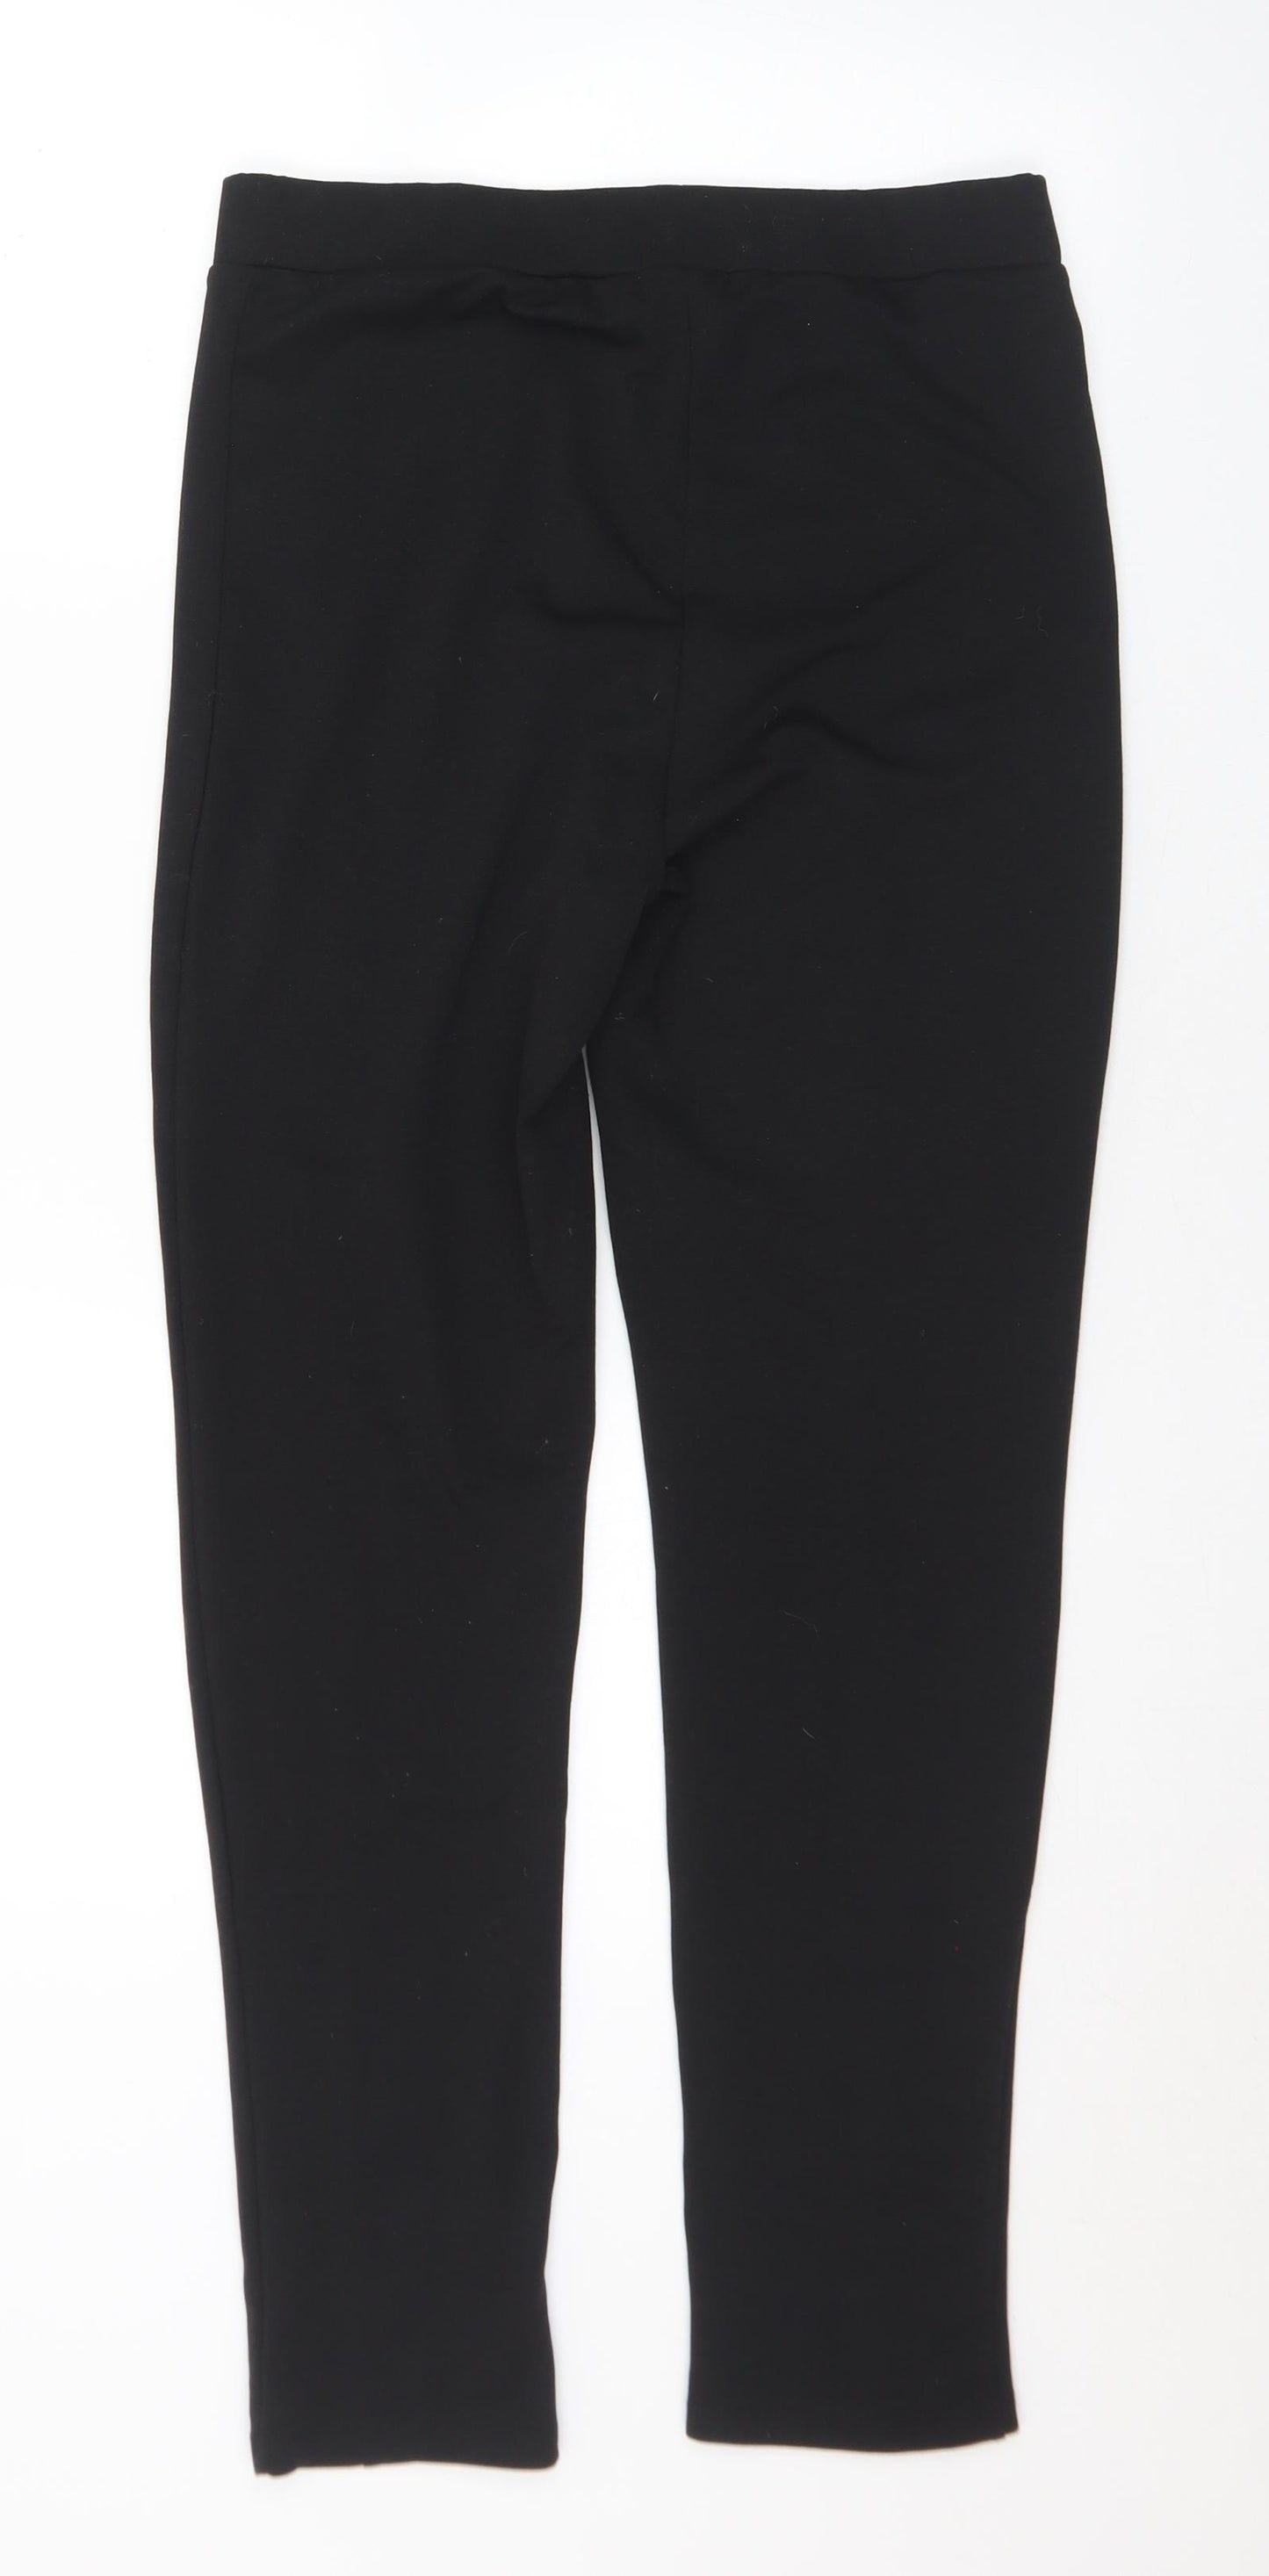 Pep&Co Womens Black  Polyester Pedal Pusher Leggings Size 10 L29 in